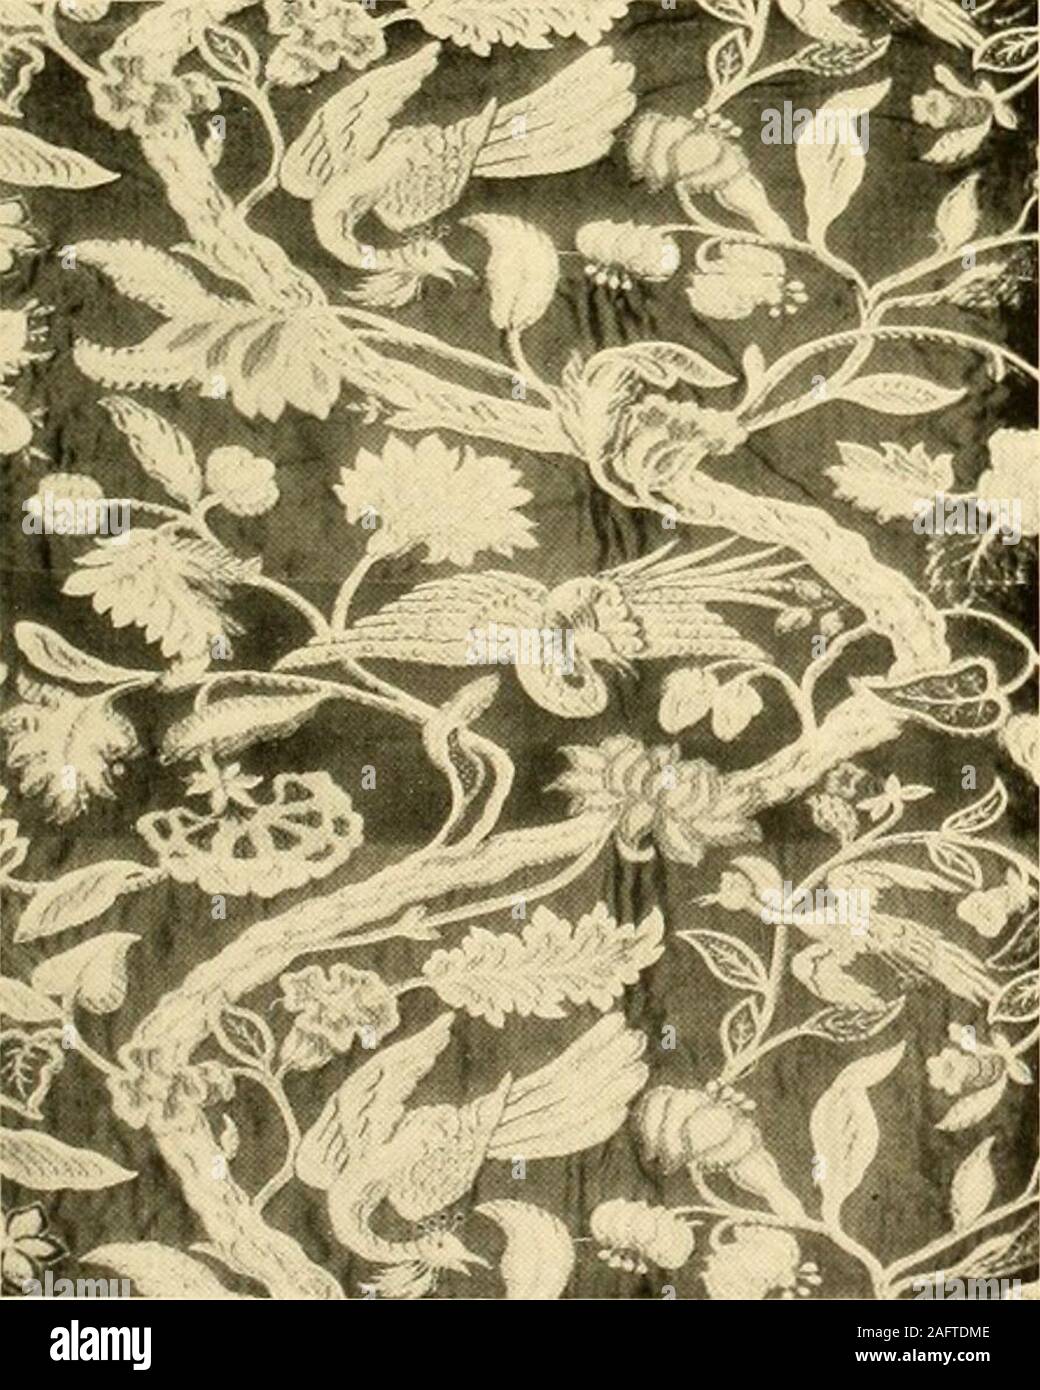 . Decorative textiles; an illustrated book on coverings for furniture, walls and floors, including damasks, brocades and velvets, tapestries, laces, embroideries, chintzes, cretones, drapery and furniture trimmings, wall papers, carpets and rugs, tooled and illuminated leathers. Stock Photo